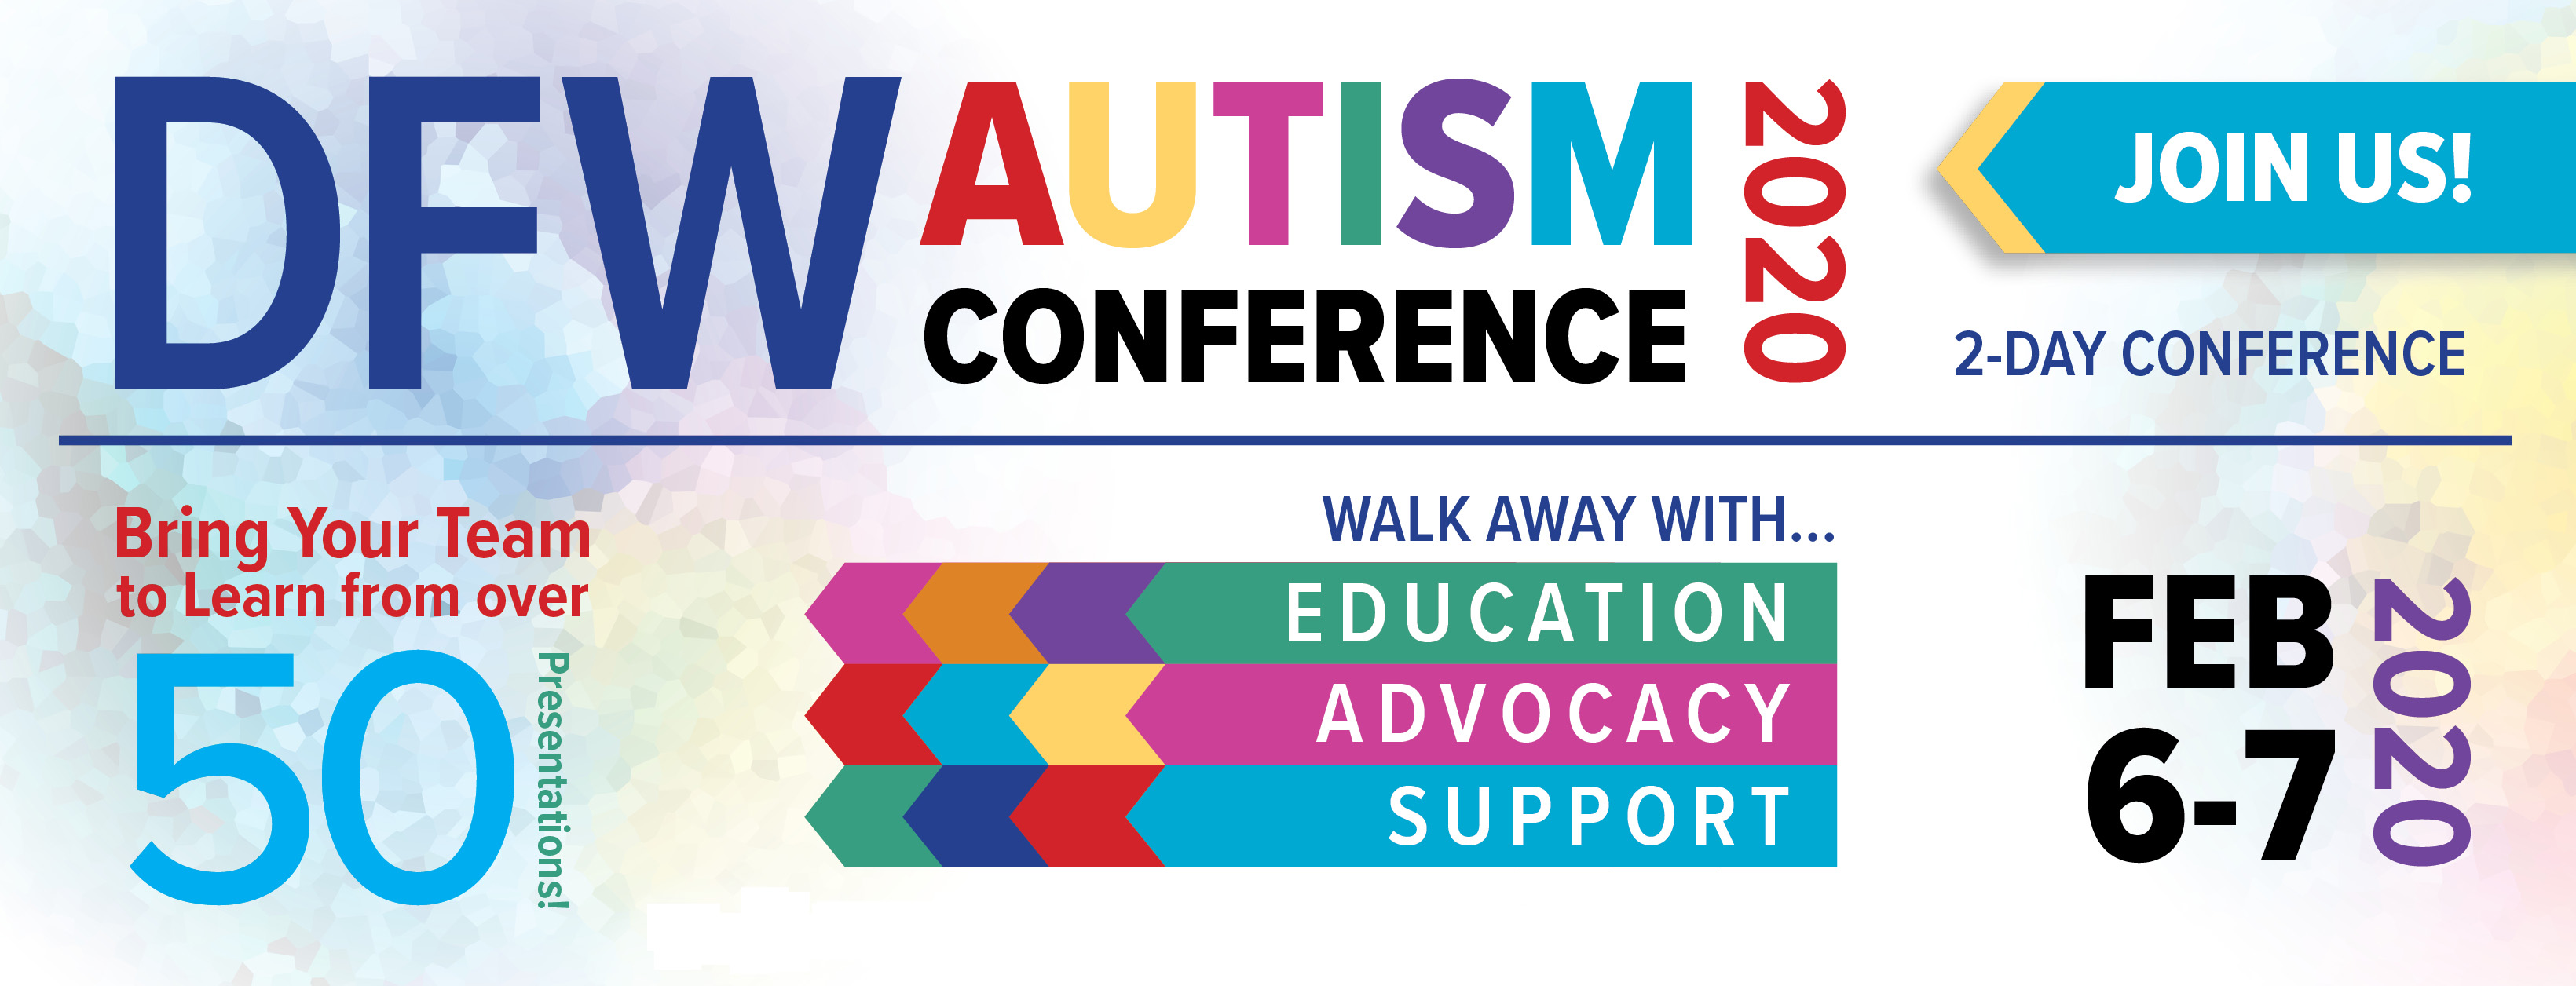 FEAT-DFW-Autism-Conference-Banner-February-2020-NoLink